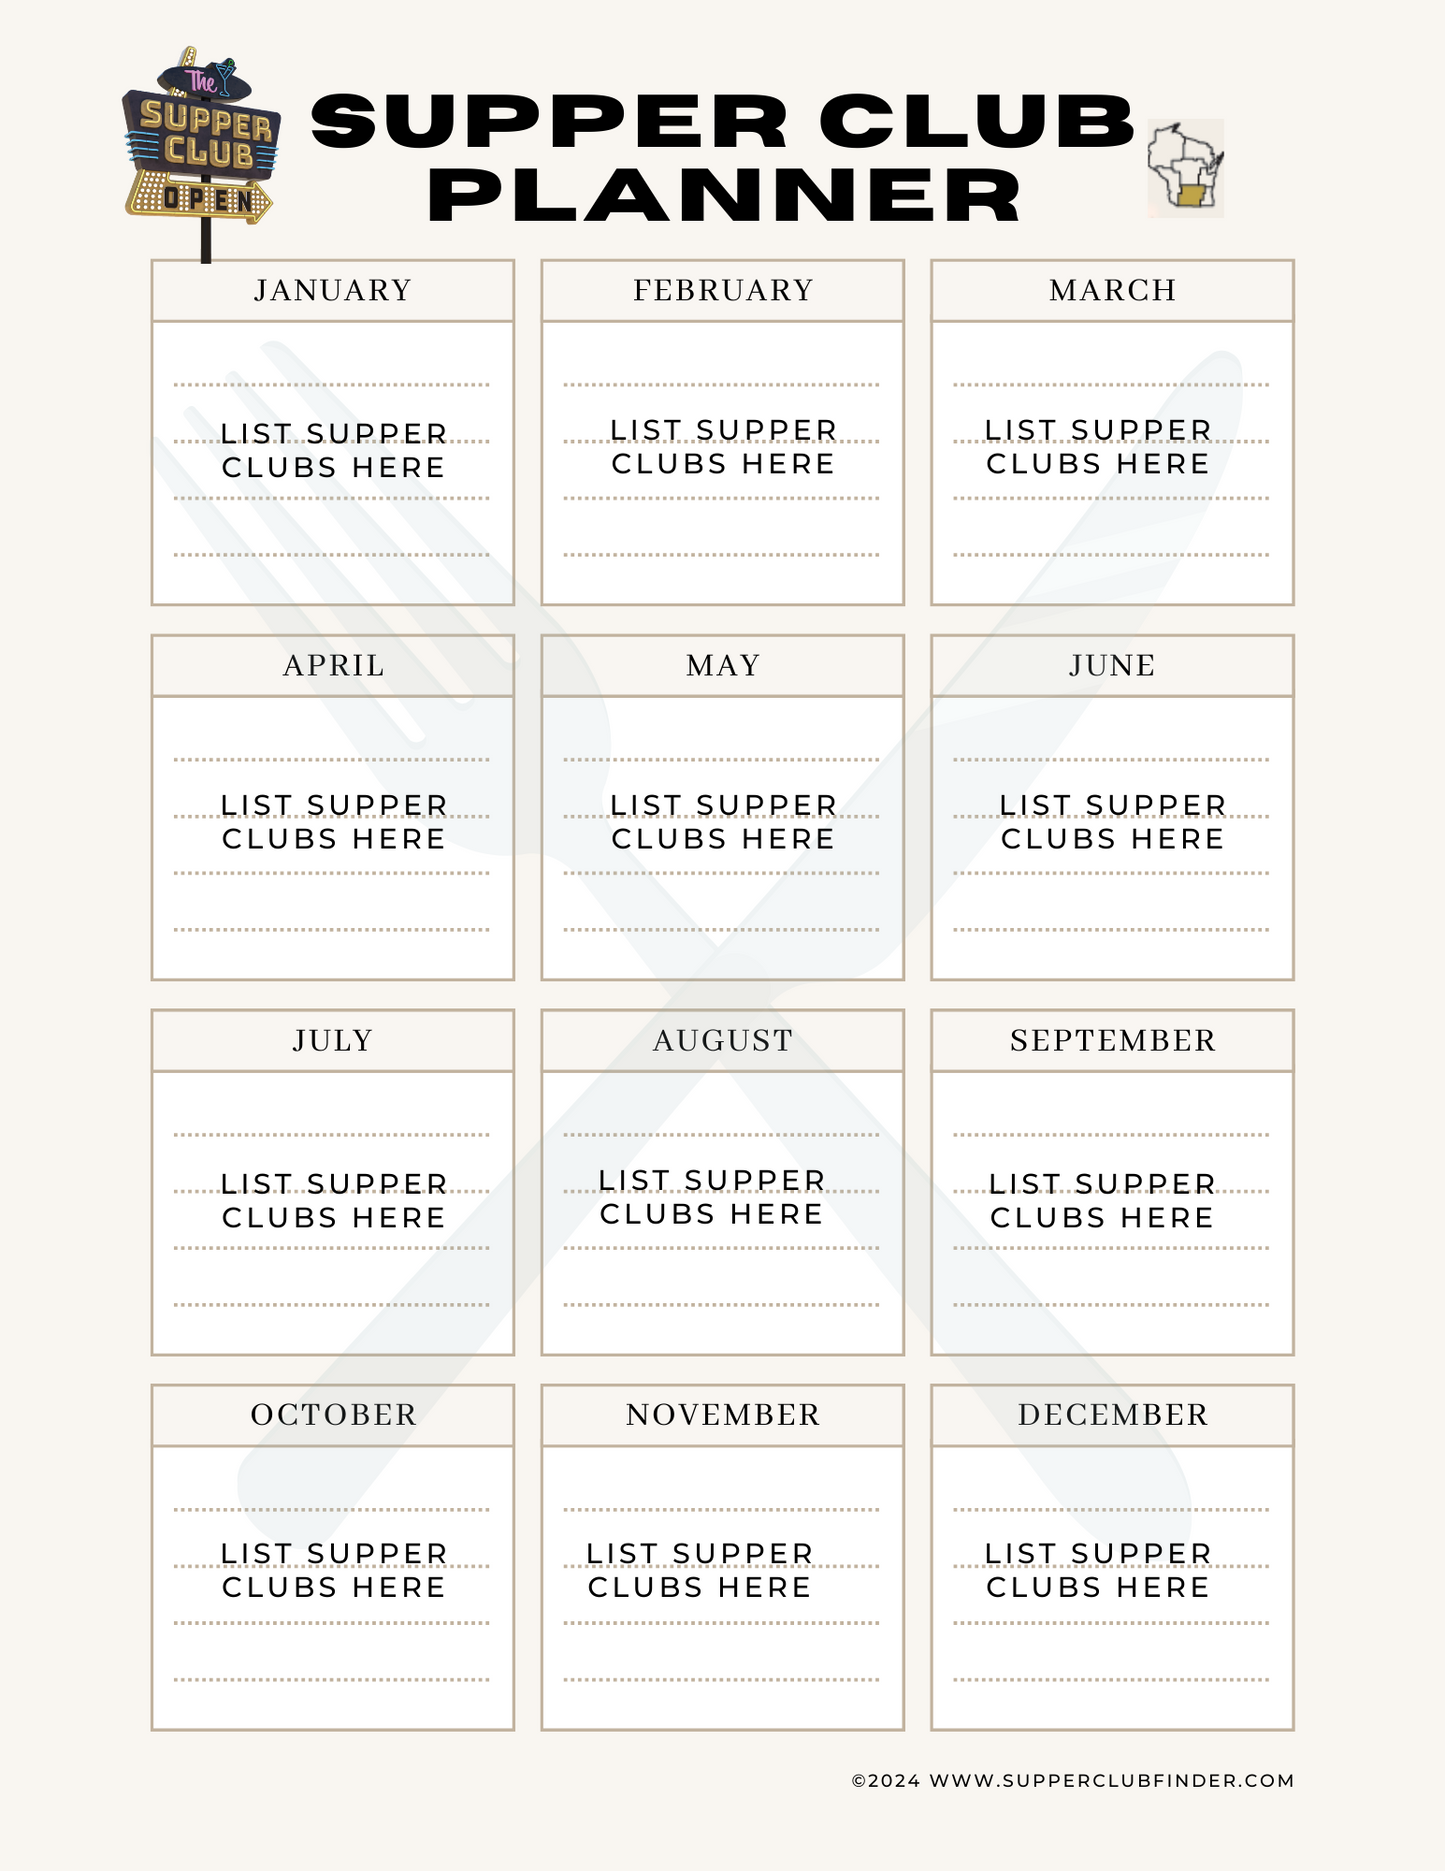 Supper Club Planner - get a game plan together for your yearly Supper Club Visits